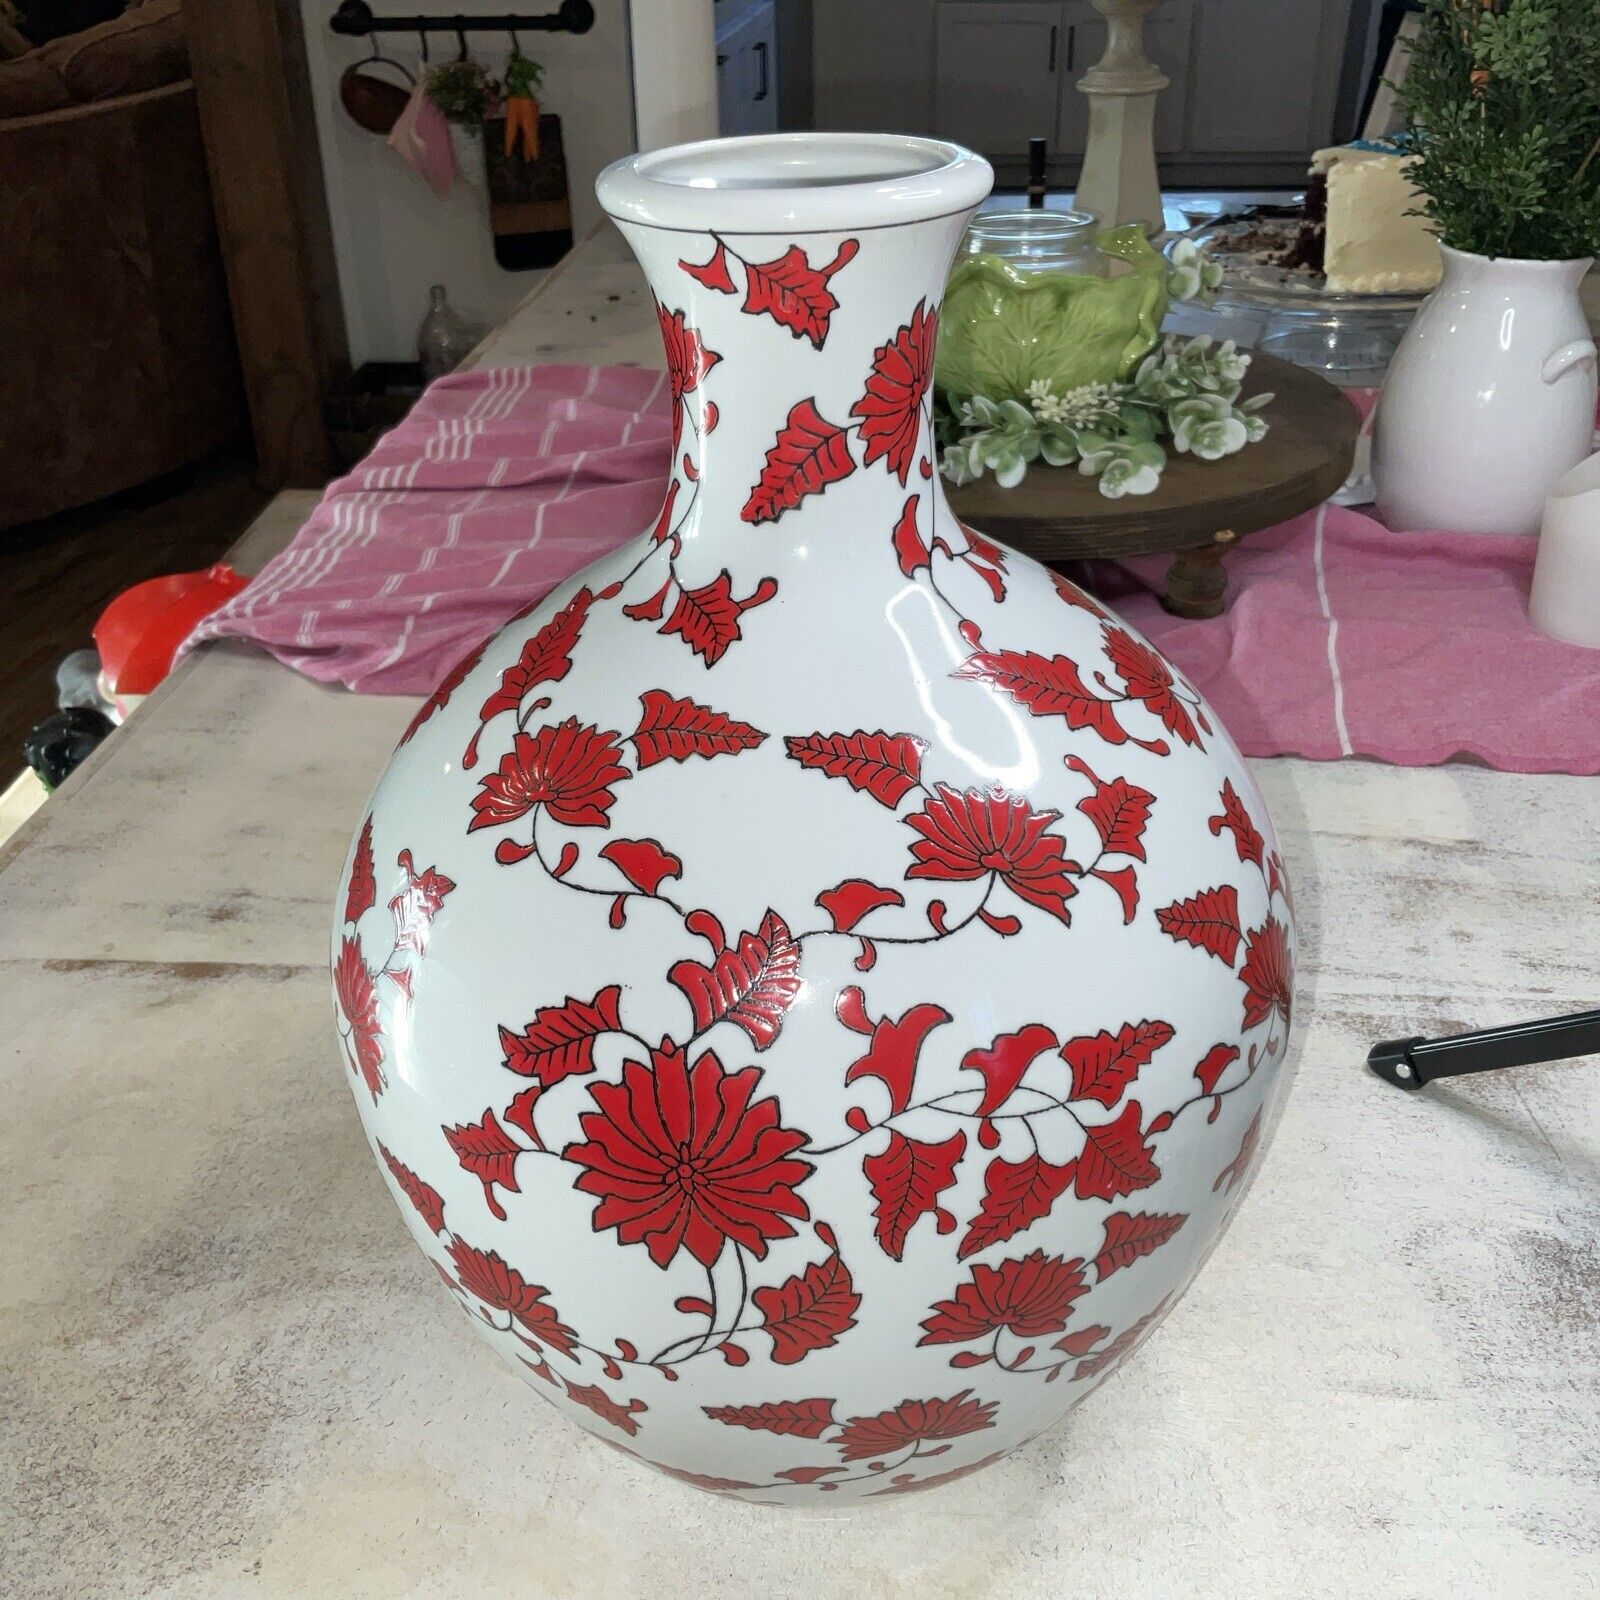 BEAUTIFUL ASIAN STYLE VASE- THICK CERAMIC PORCELAIN-RED & WHITE FLORAL DESIGN